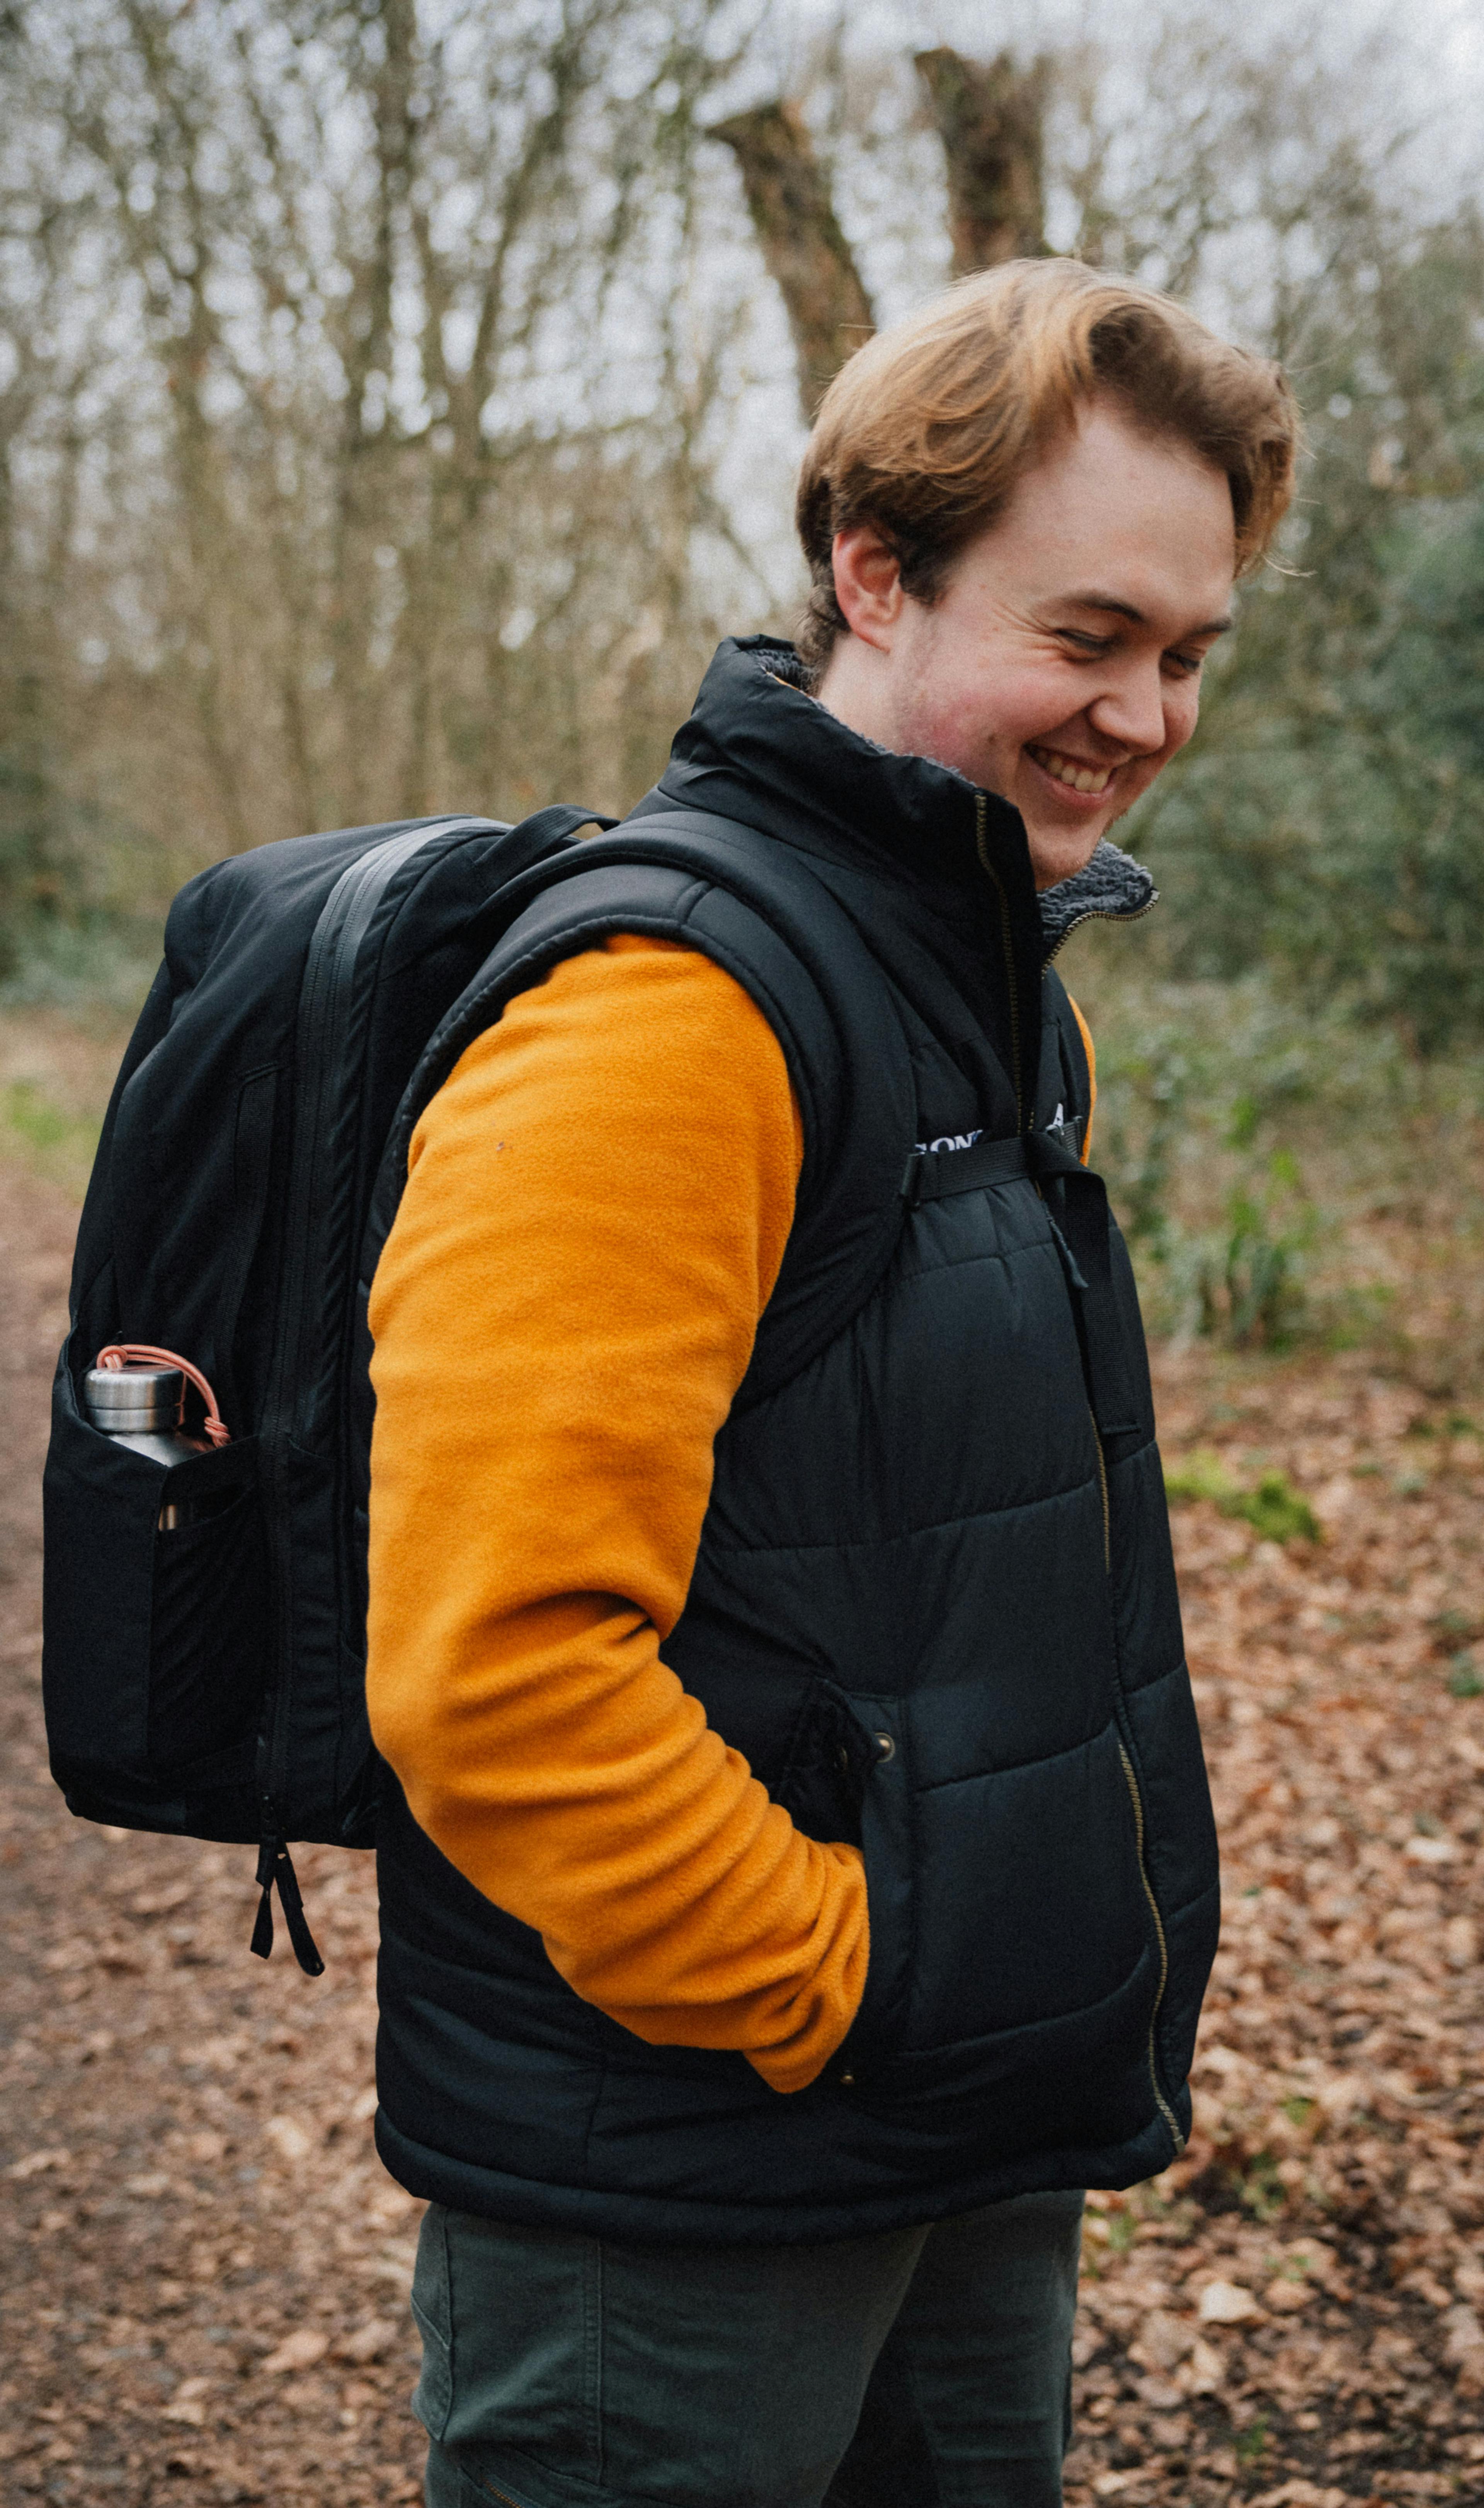 The Everything Backpack on a smiling man in the UK.